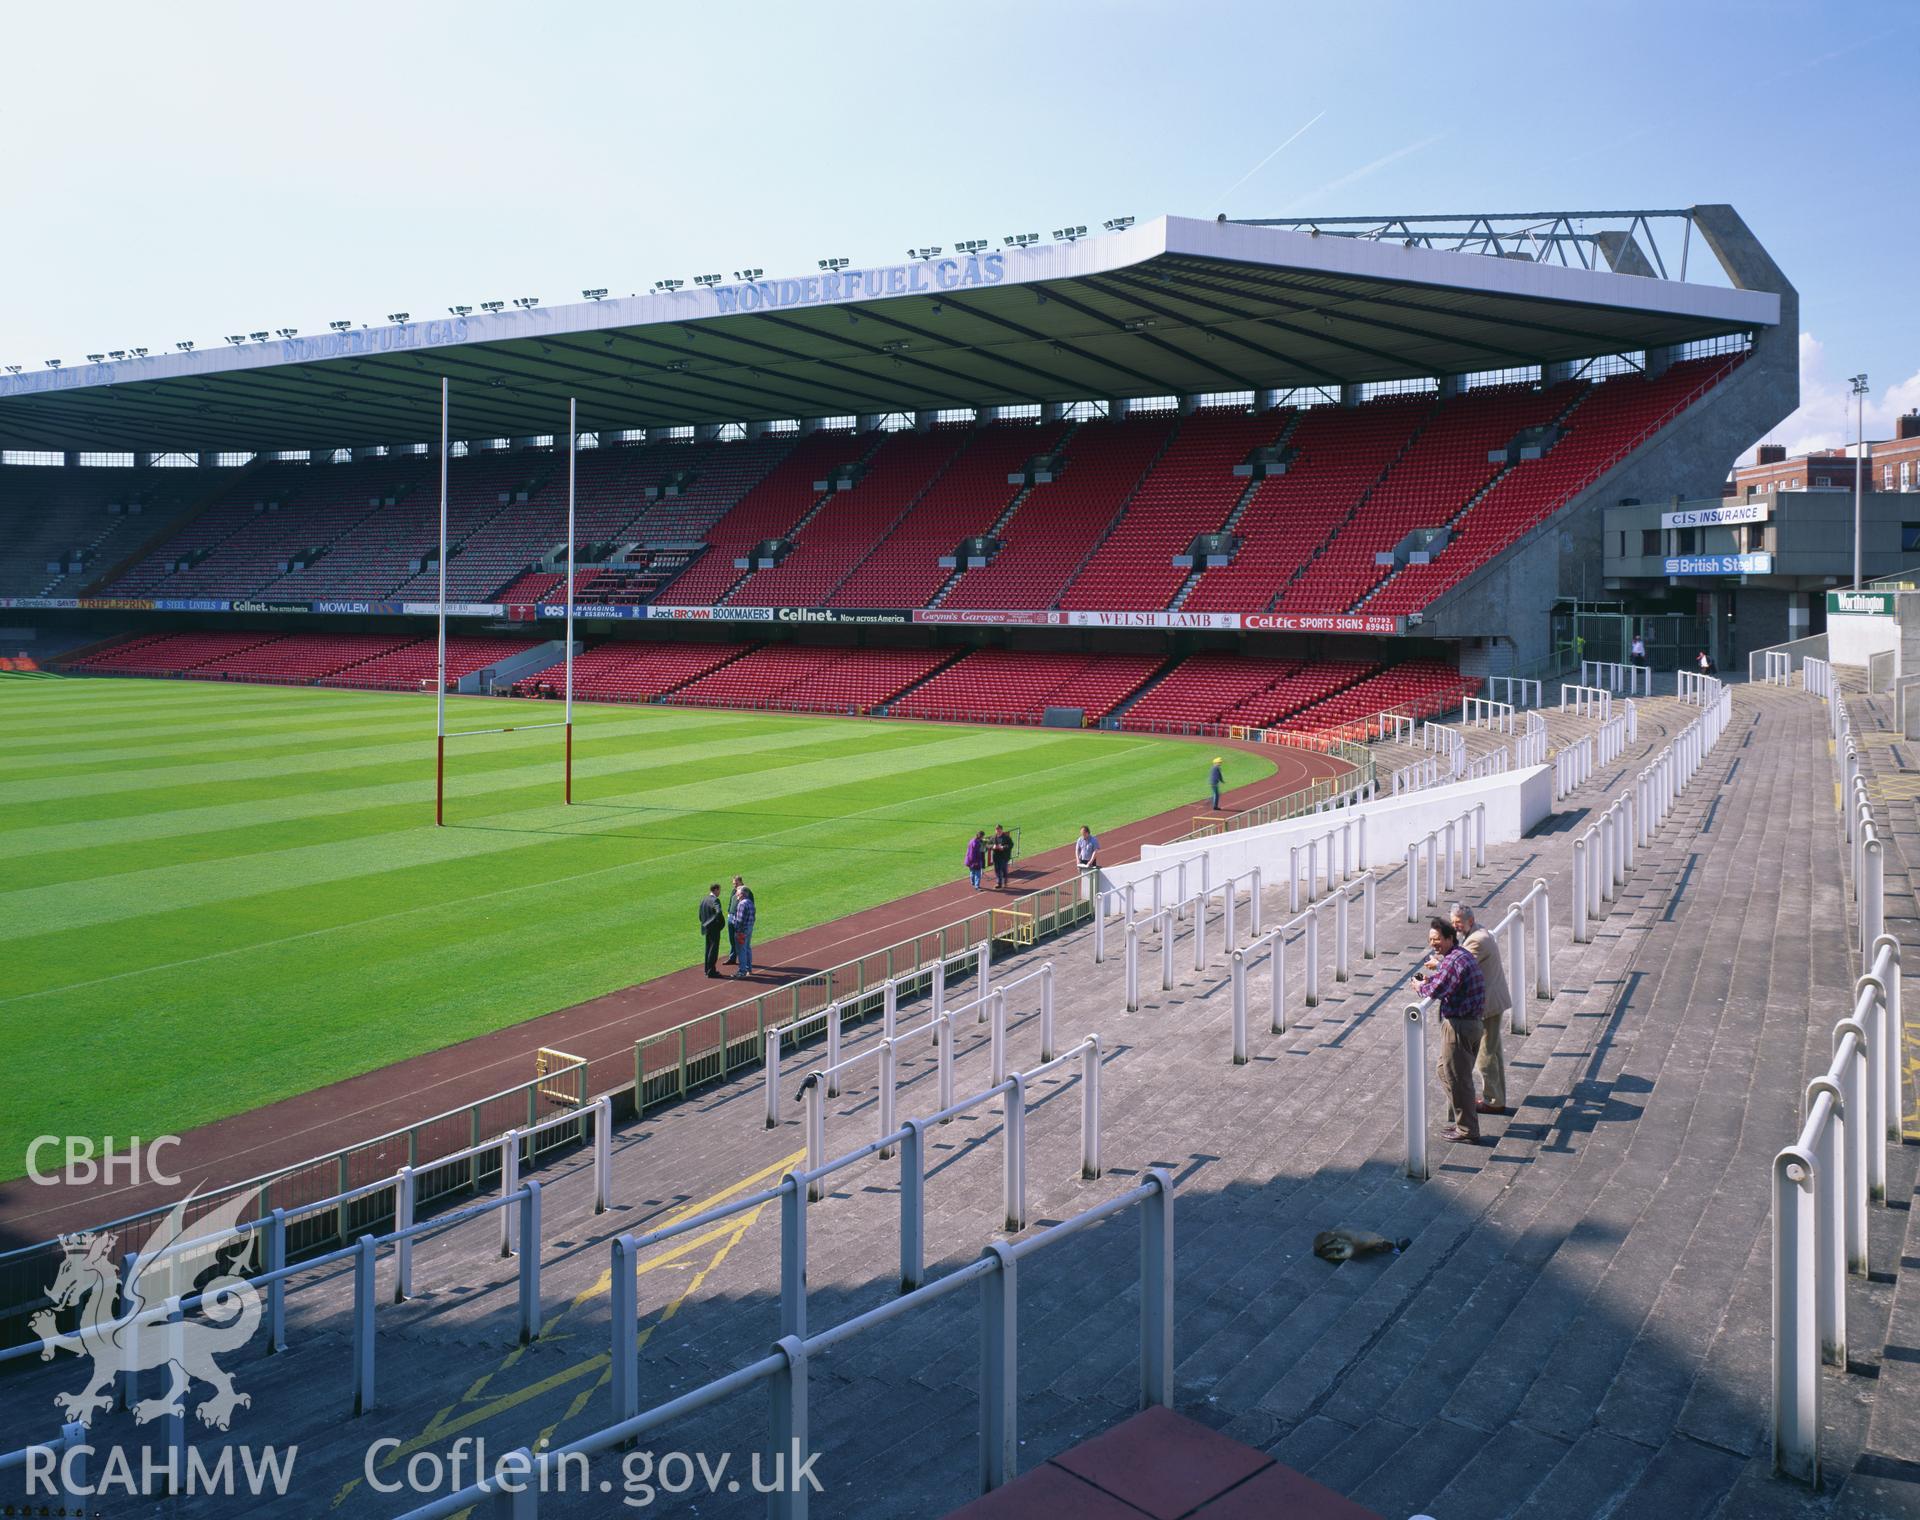 Colour transparency showing a view of the pitch and seating at Cardiff Arms Park, produced by Iain Wright 1997